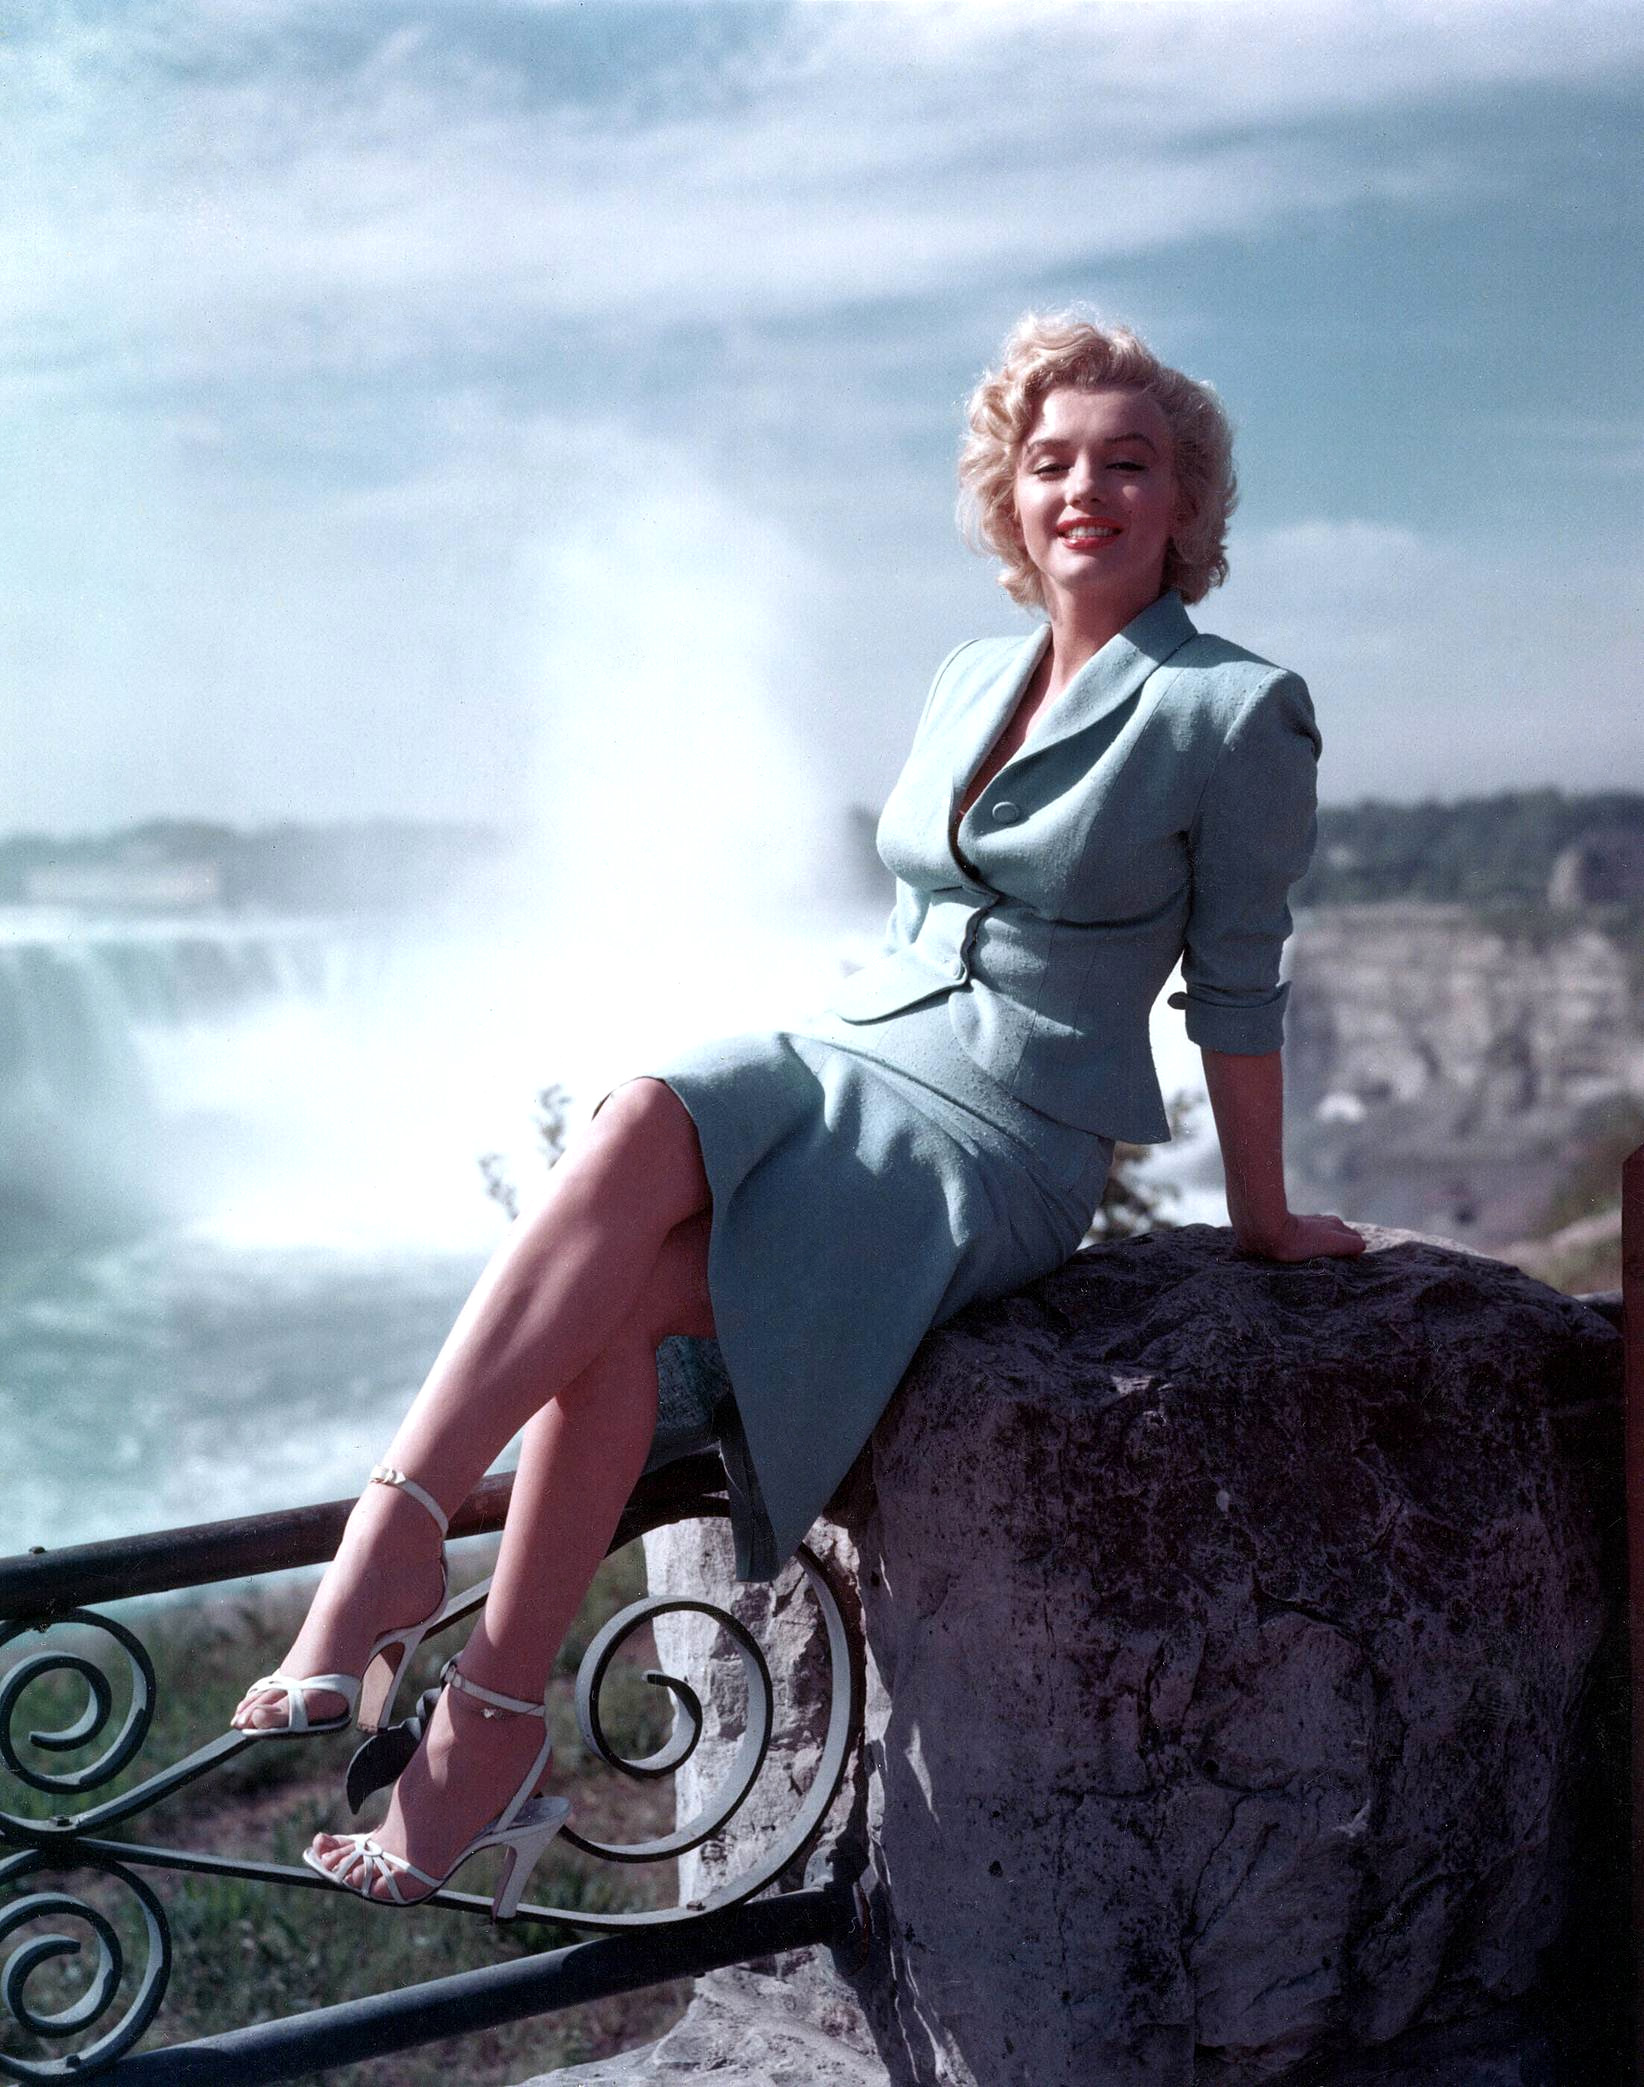 Marilyn Monroe Photos, Pictures, Photo, Biography, Wallpapers, Marilyn Monroe Fan Web Page